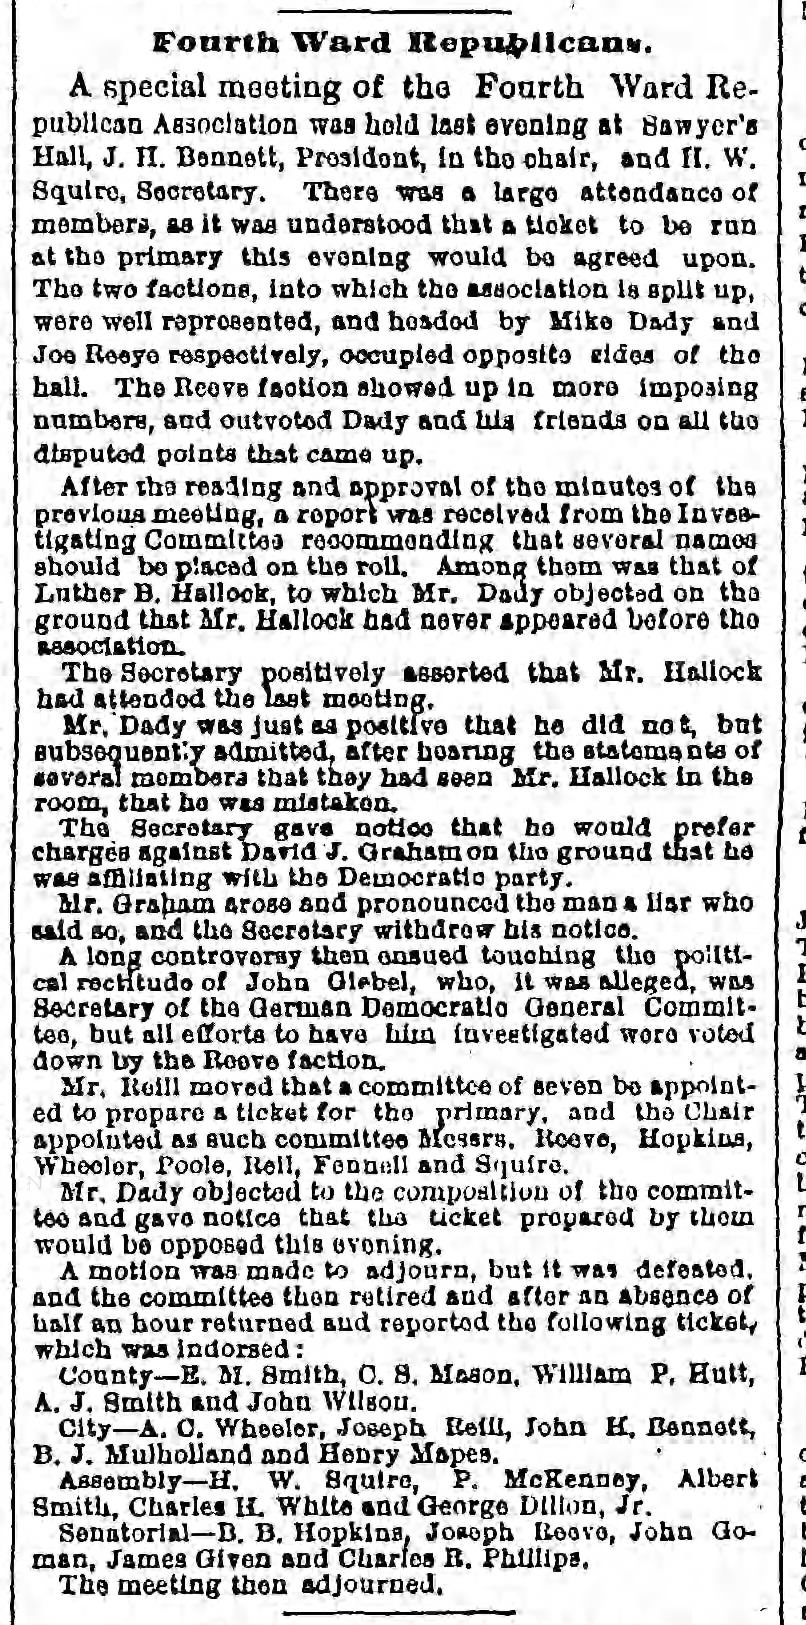 Thursday, October 16, 1879 - Page 2